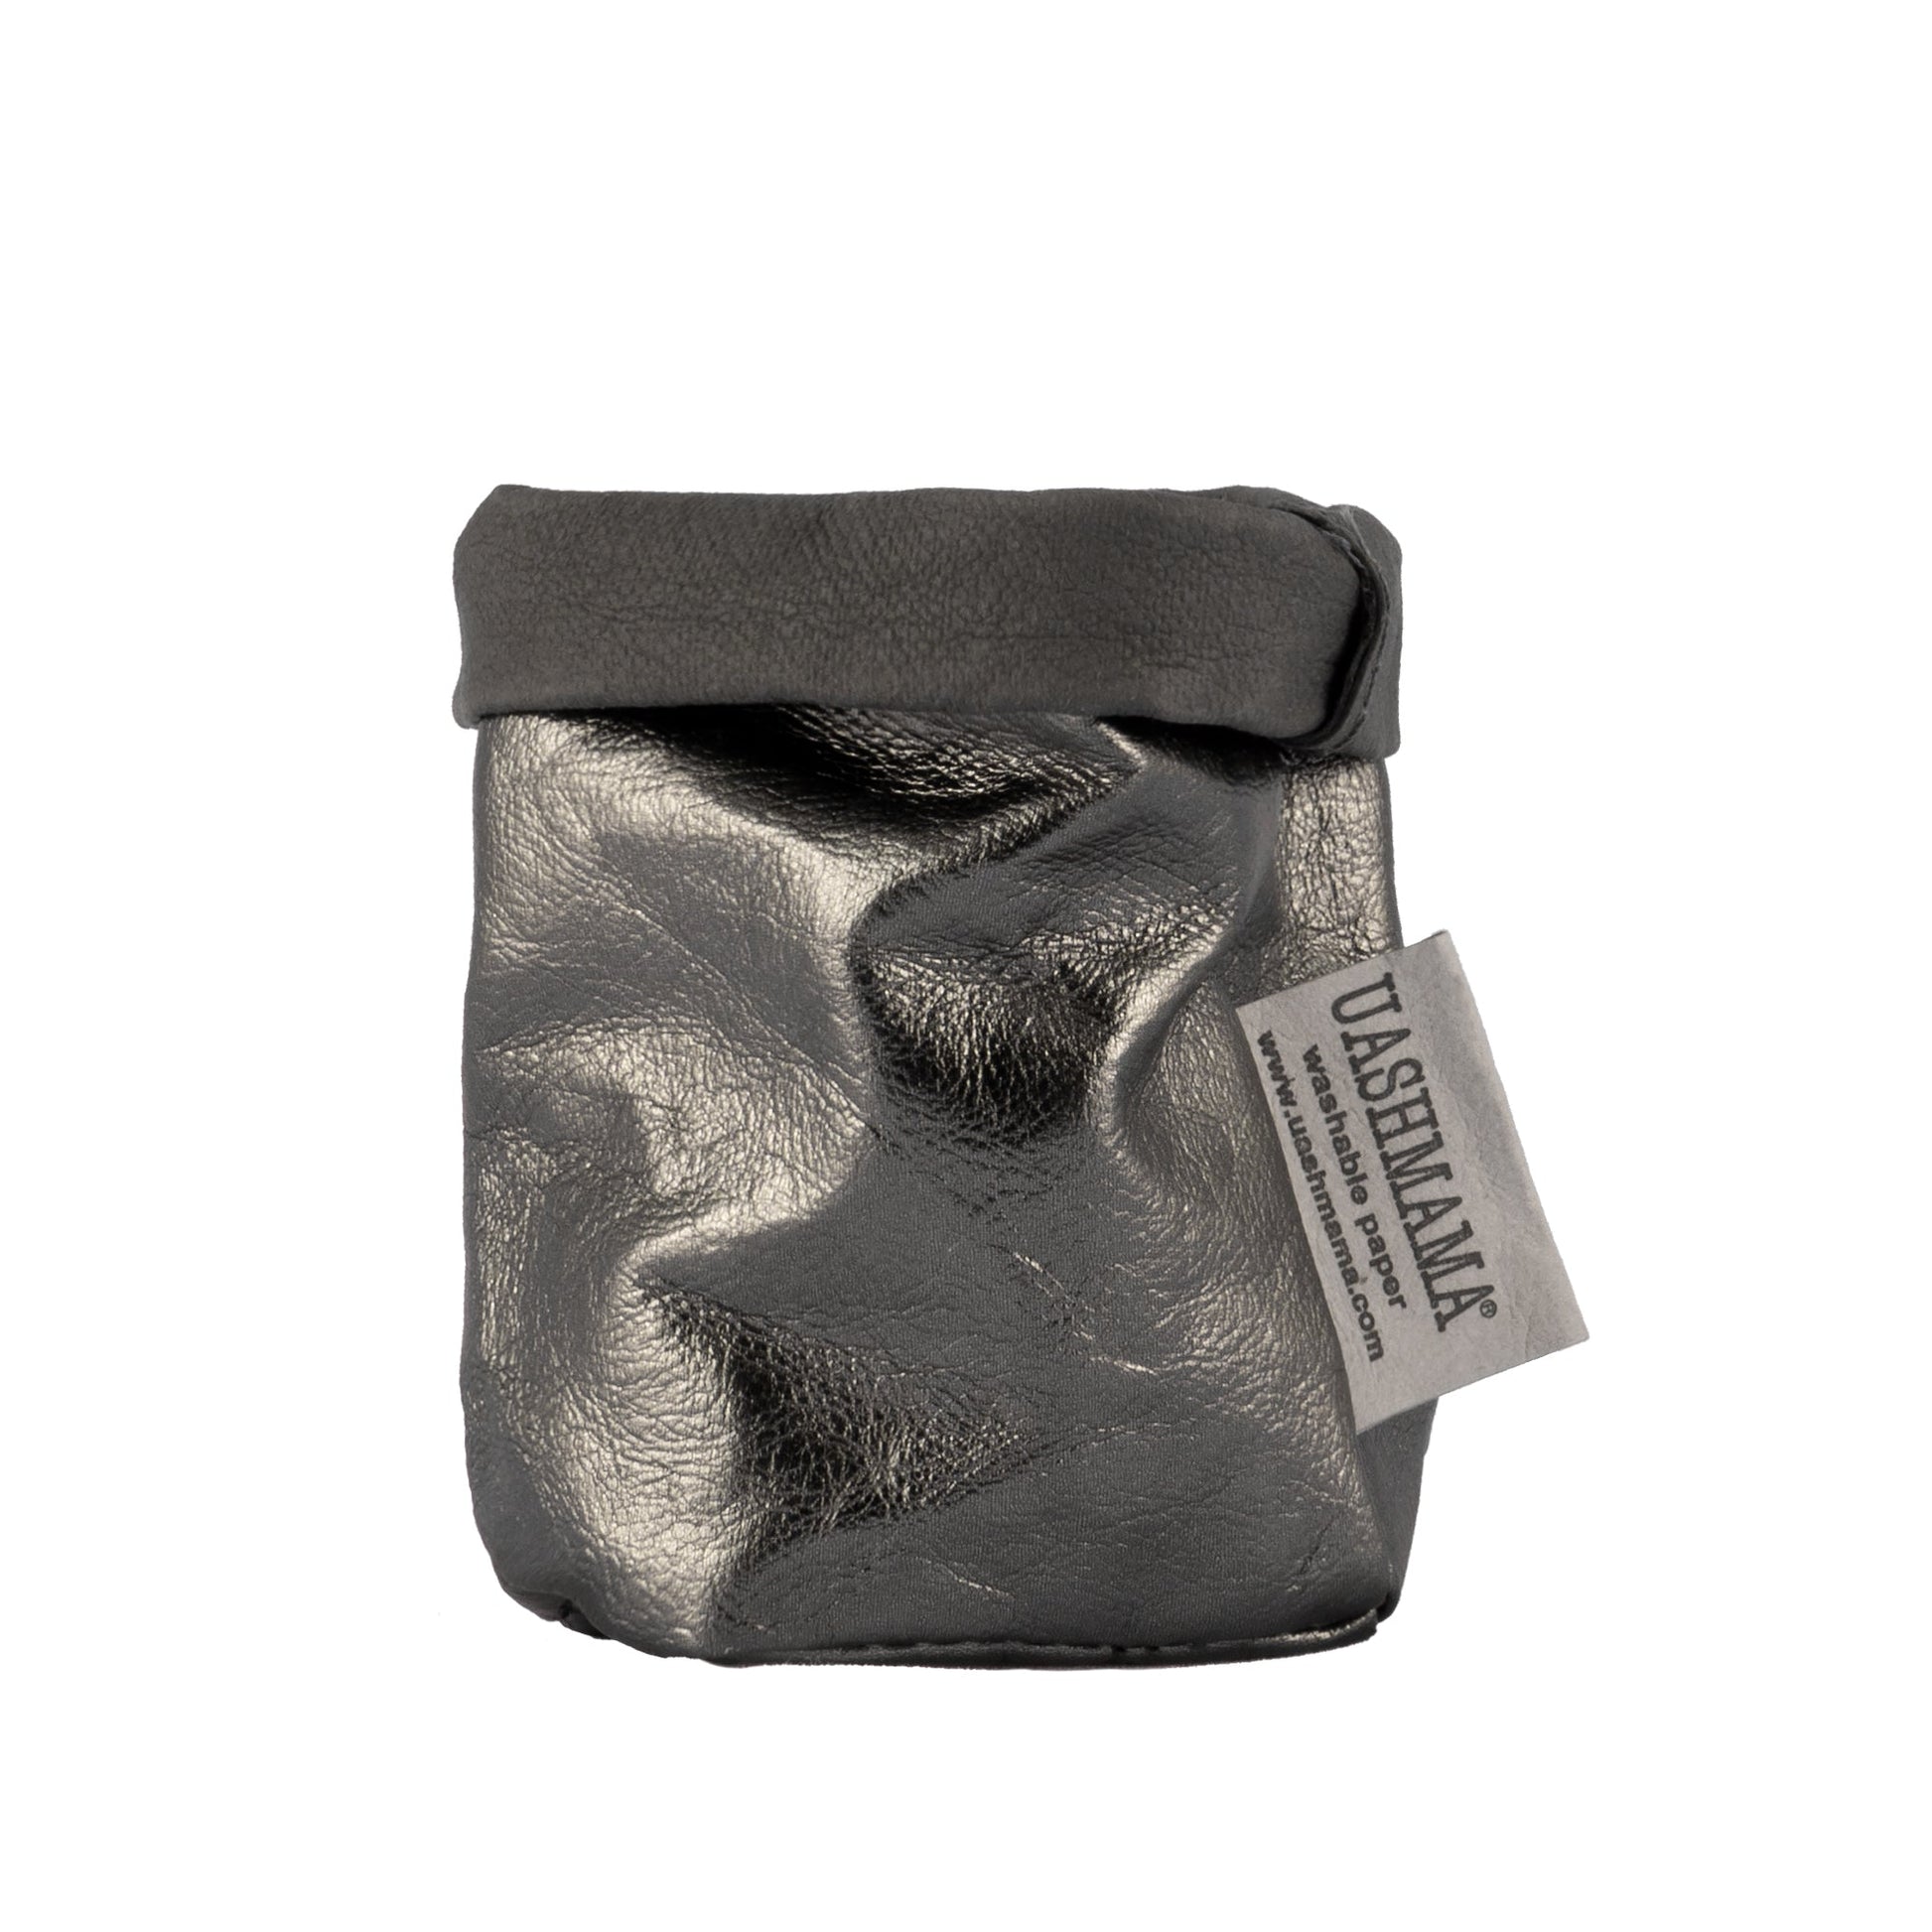 A washable paper bag is shown. The bag is rolled down at the top and features a UASHMAMA logo label on the bottom left corner. The bag pictured is the extra small size in metallic dark grey.